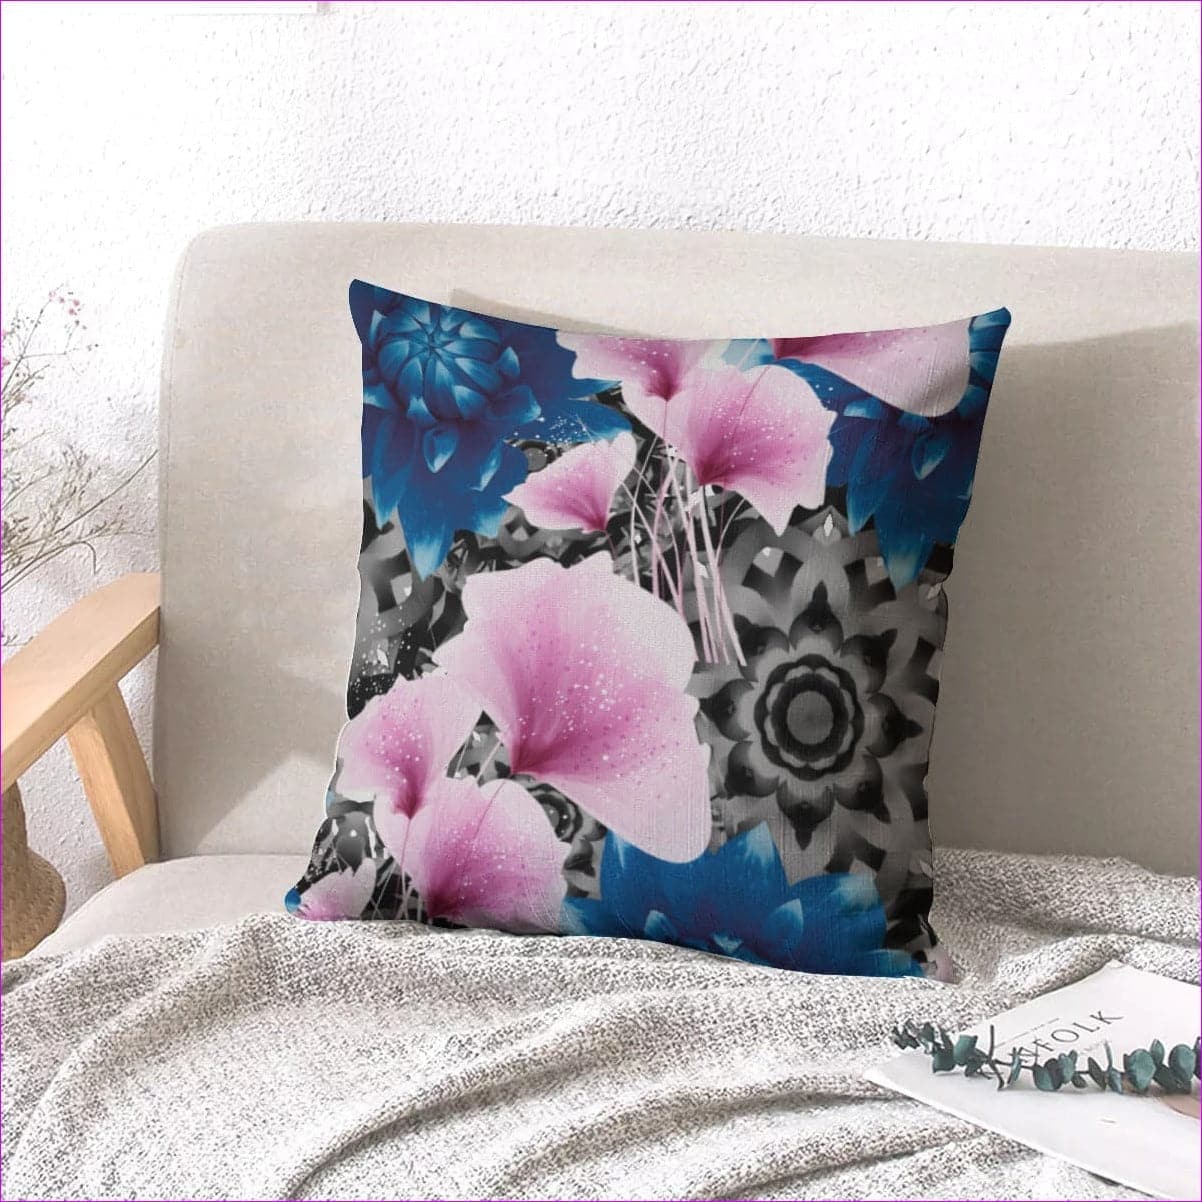 Floral Realm Couch pillow with pillow Inserts | linen type fabric - throw pillow at TFC&H Co.